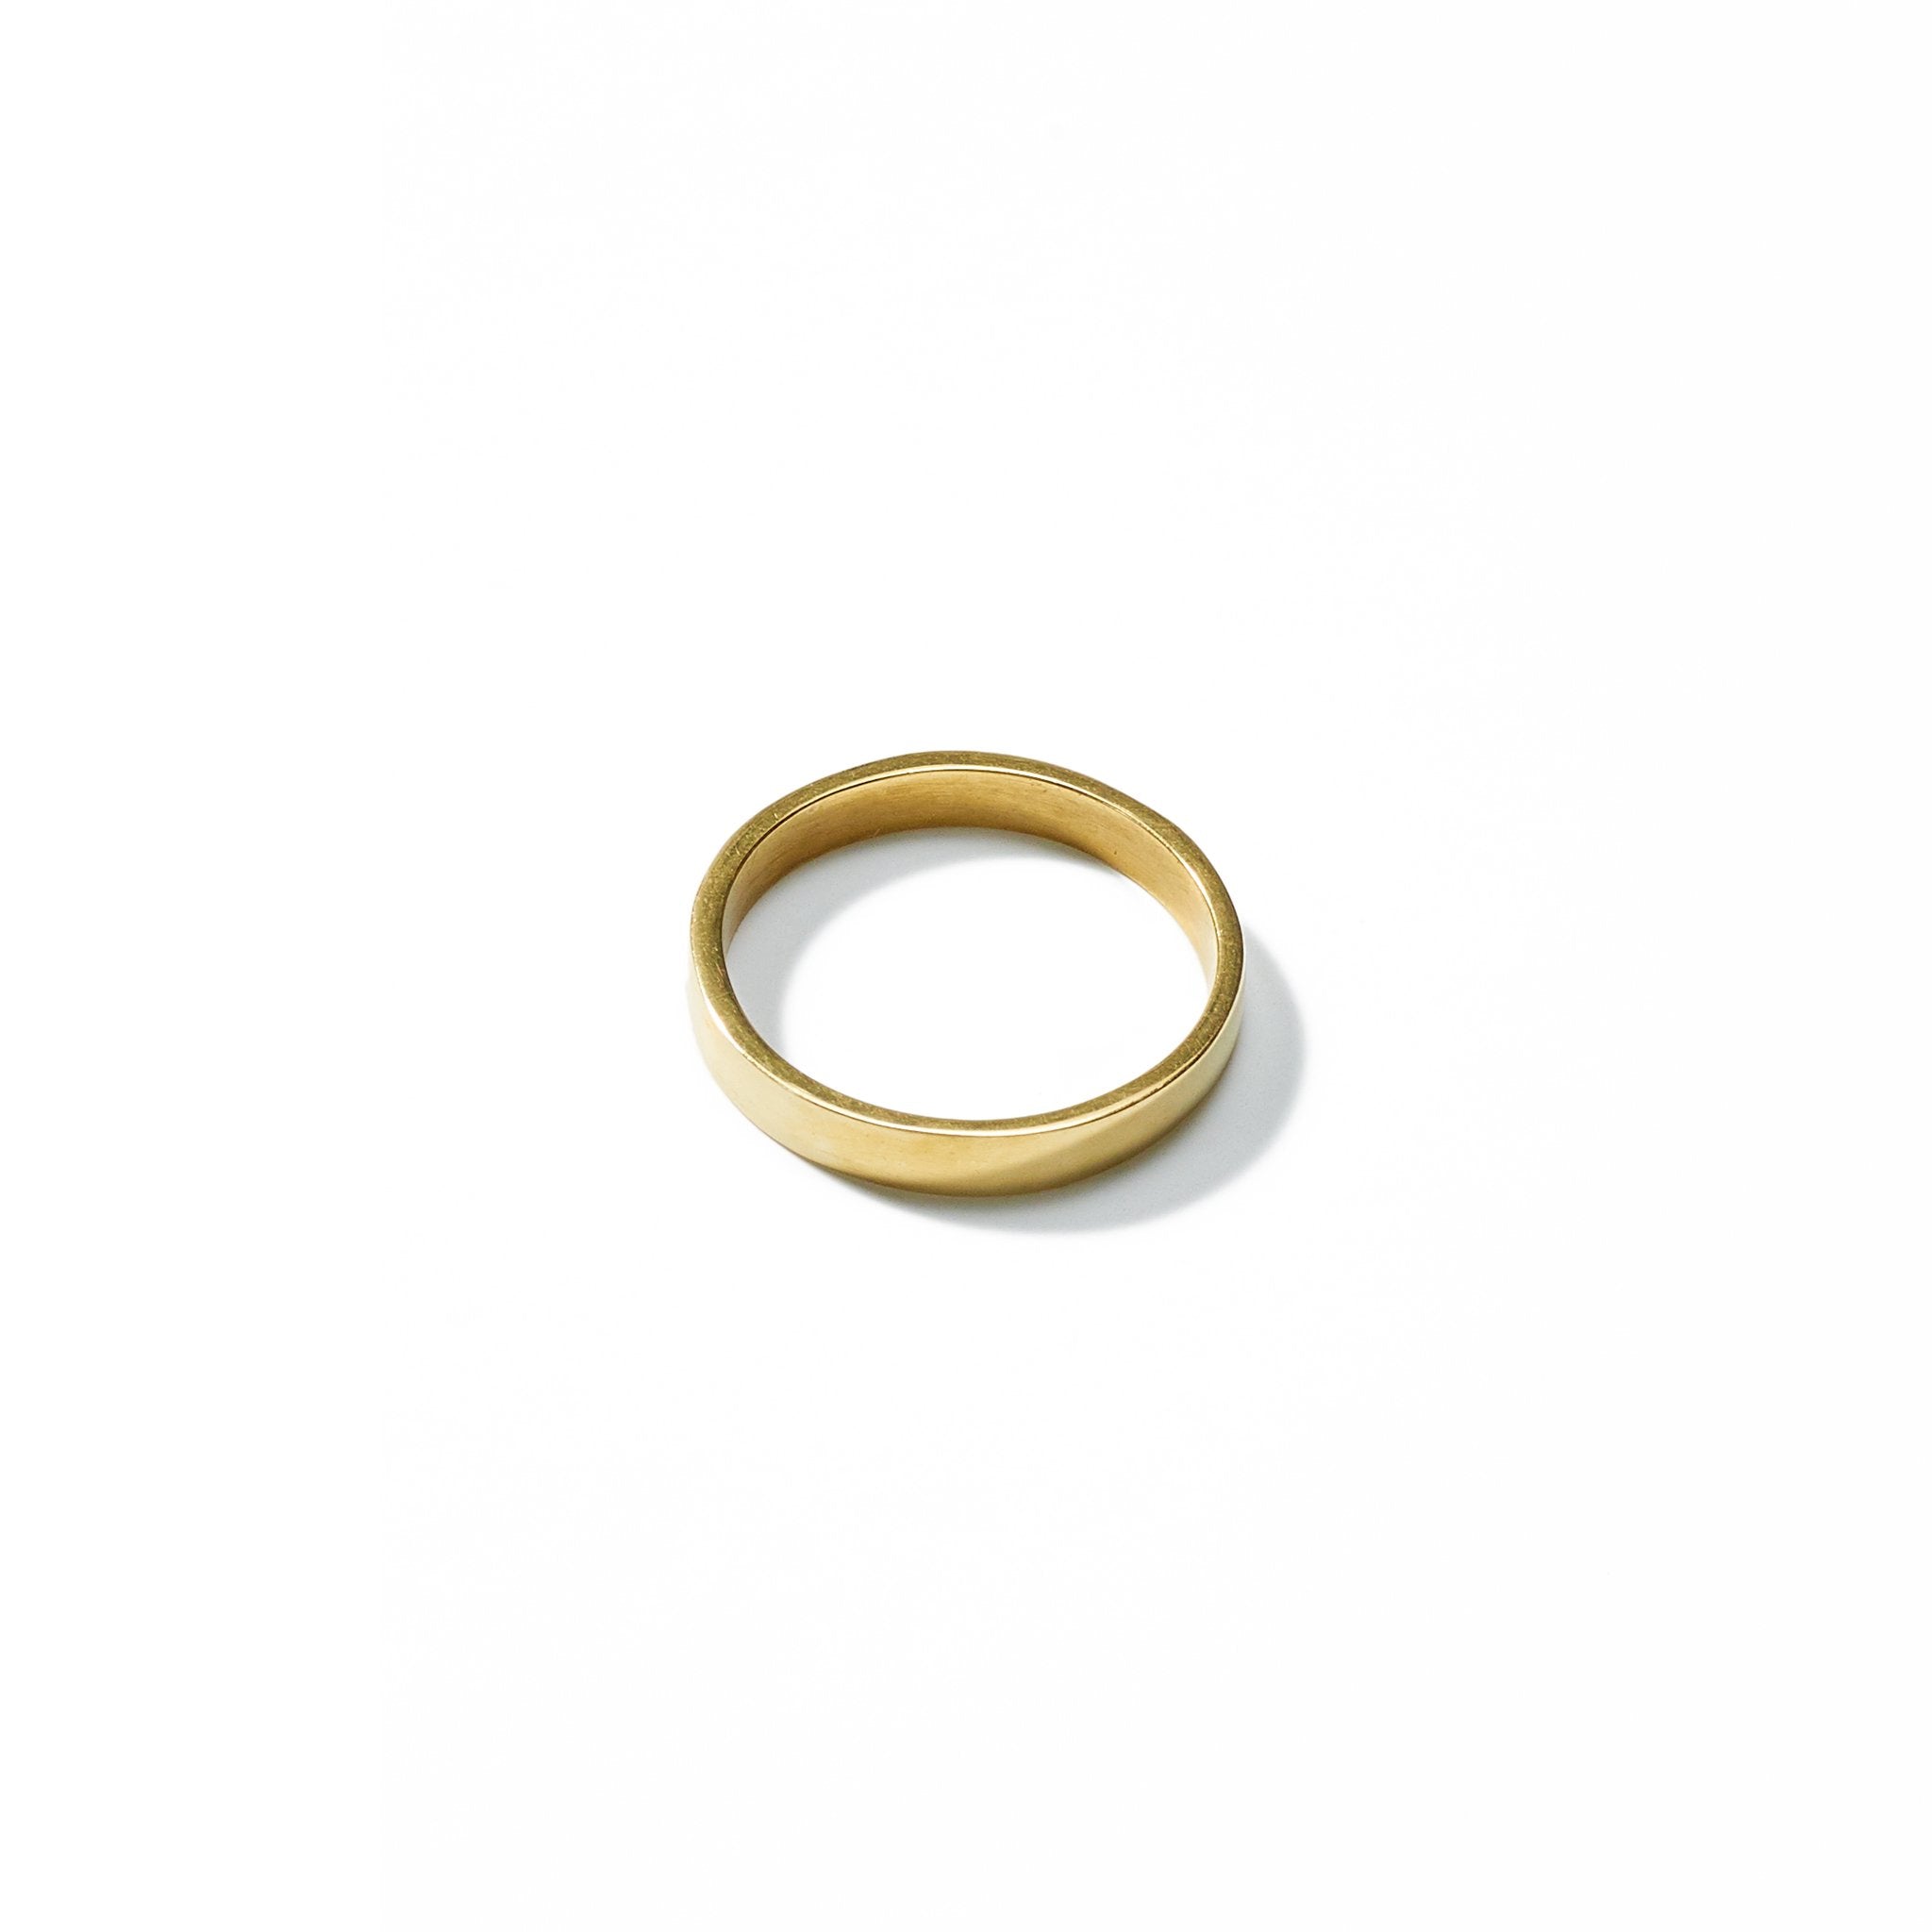 A classic and understated size 8 ring, of narrow width, handcrafted from upcycled brass.Perfect for stacking or beautiful alone.